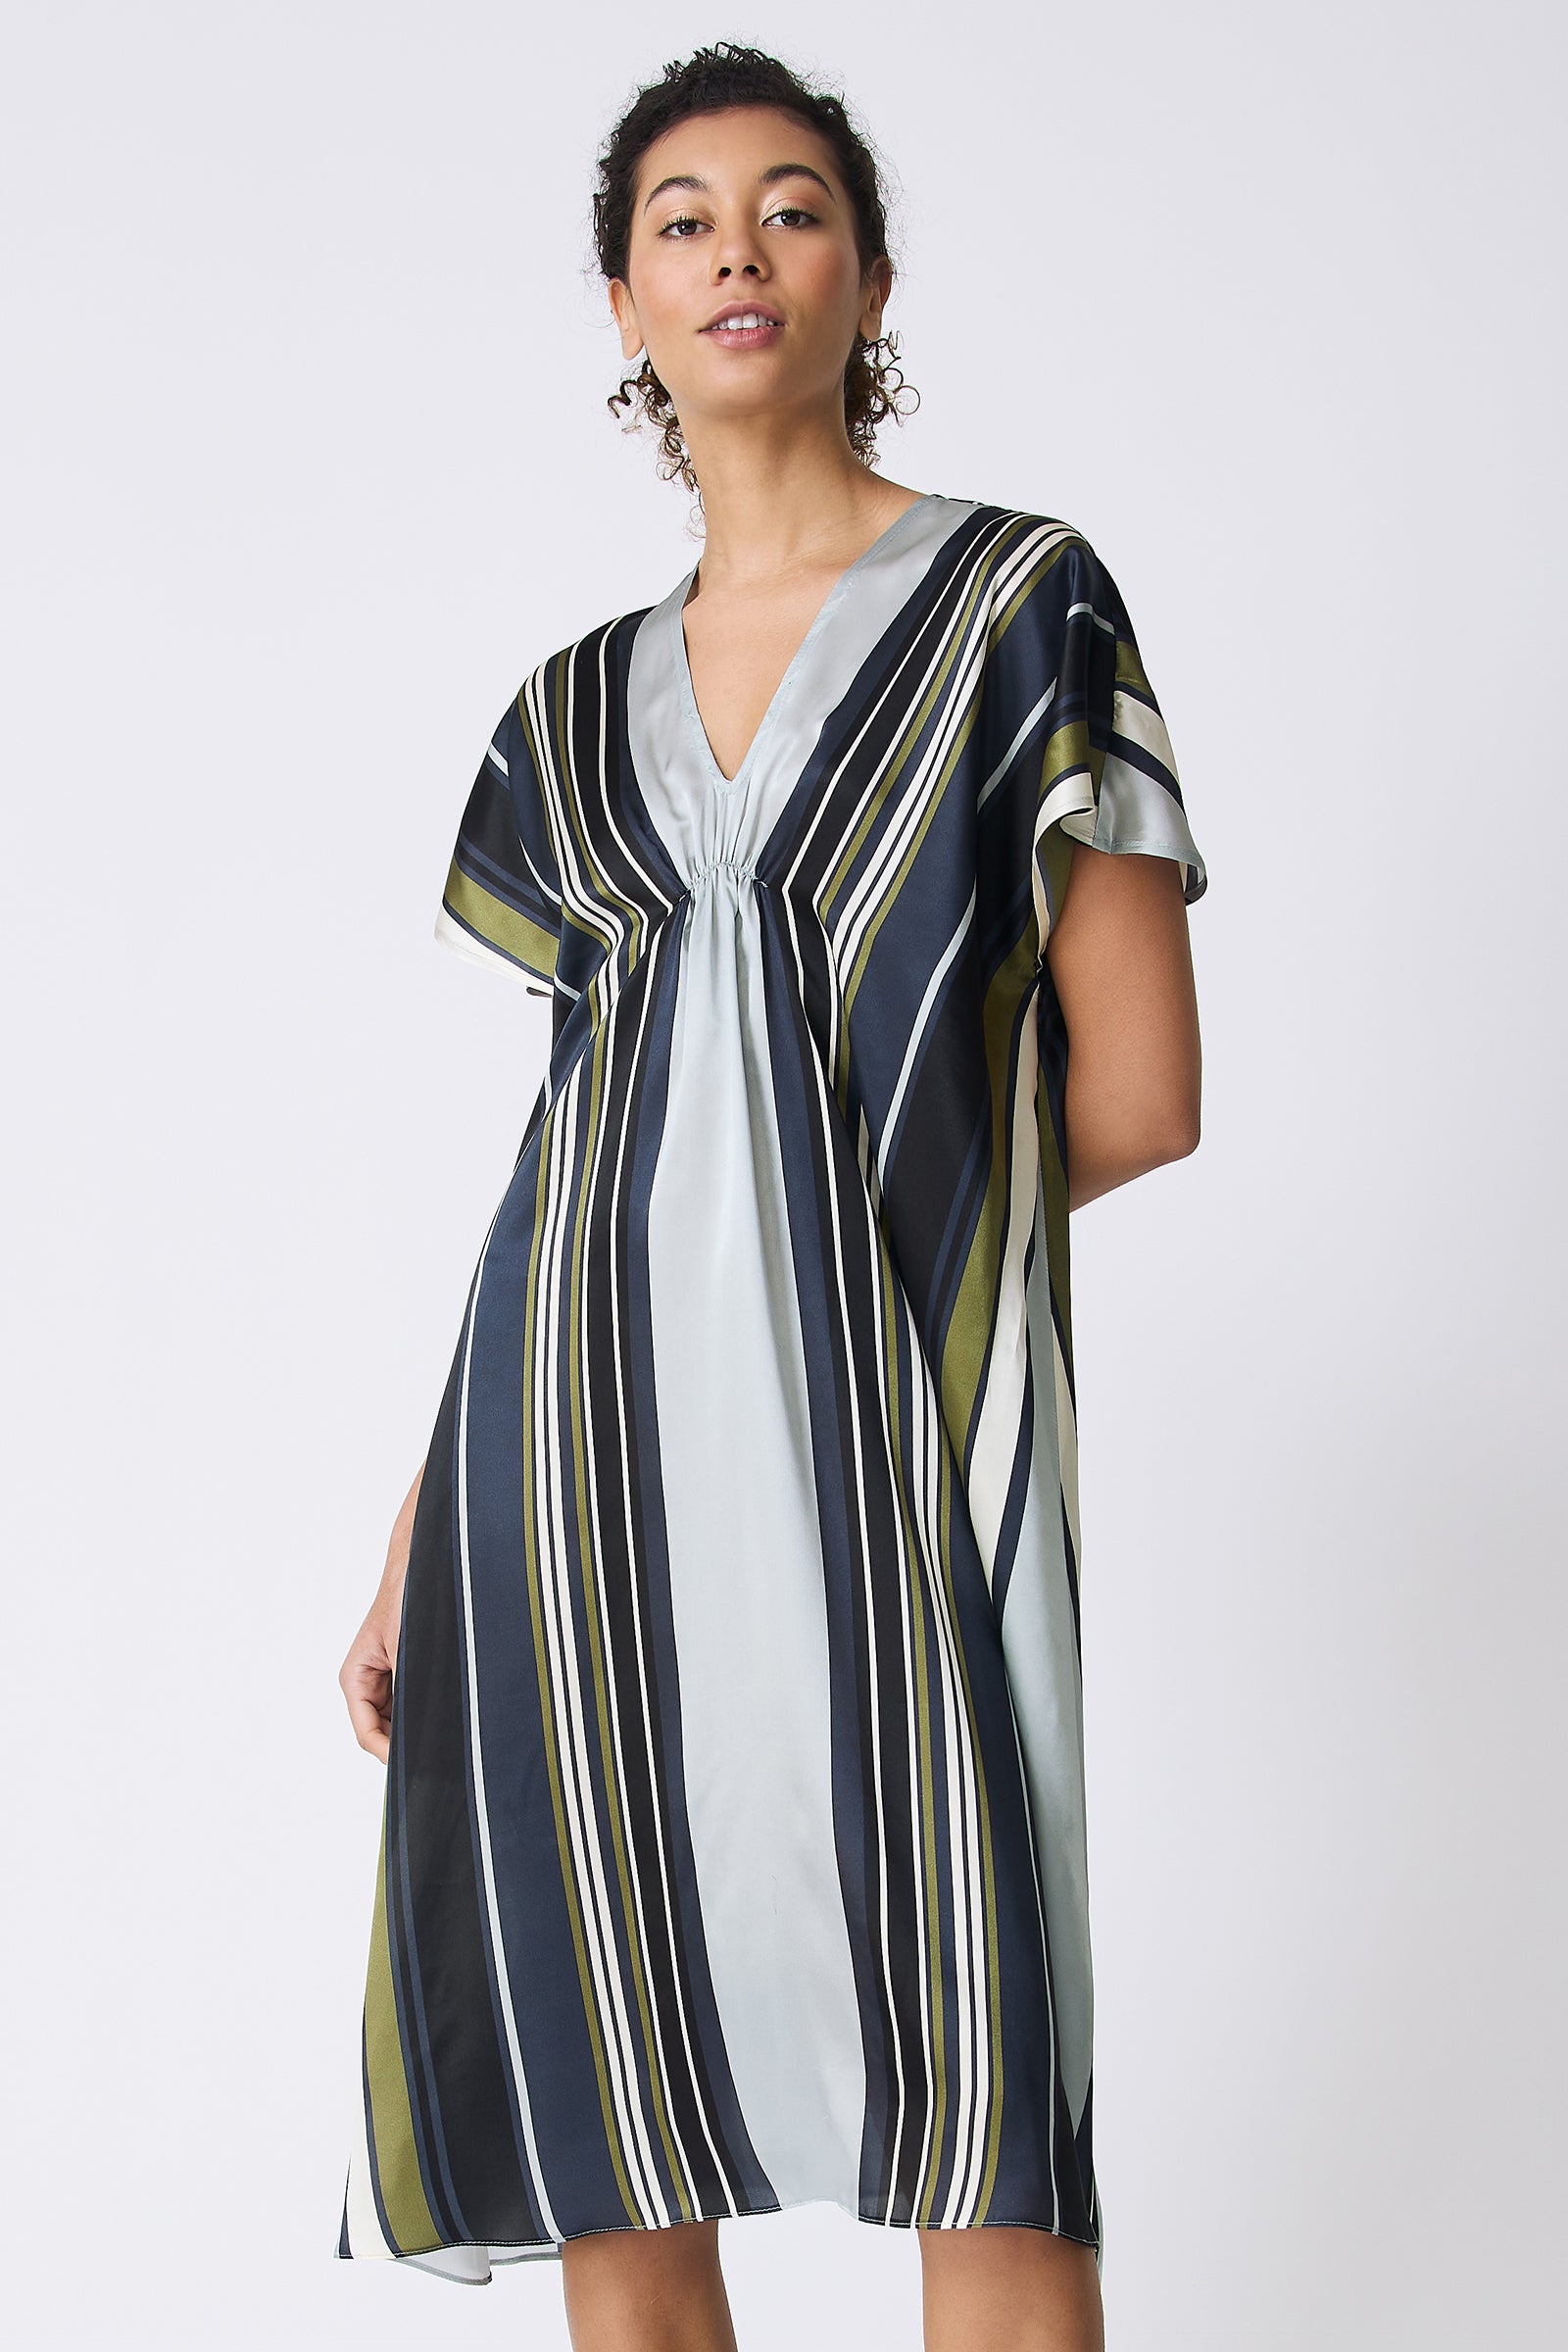 Shop All Just In Styles – KAL RIEMAN